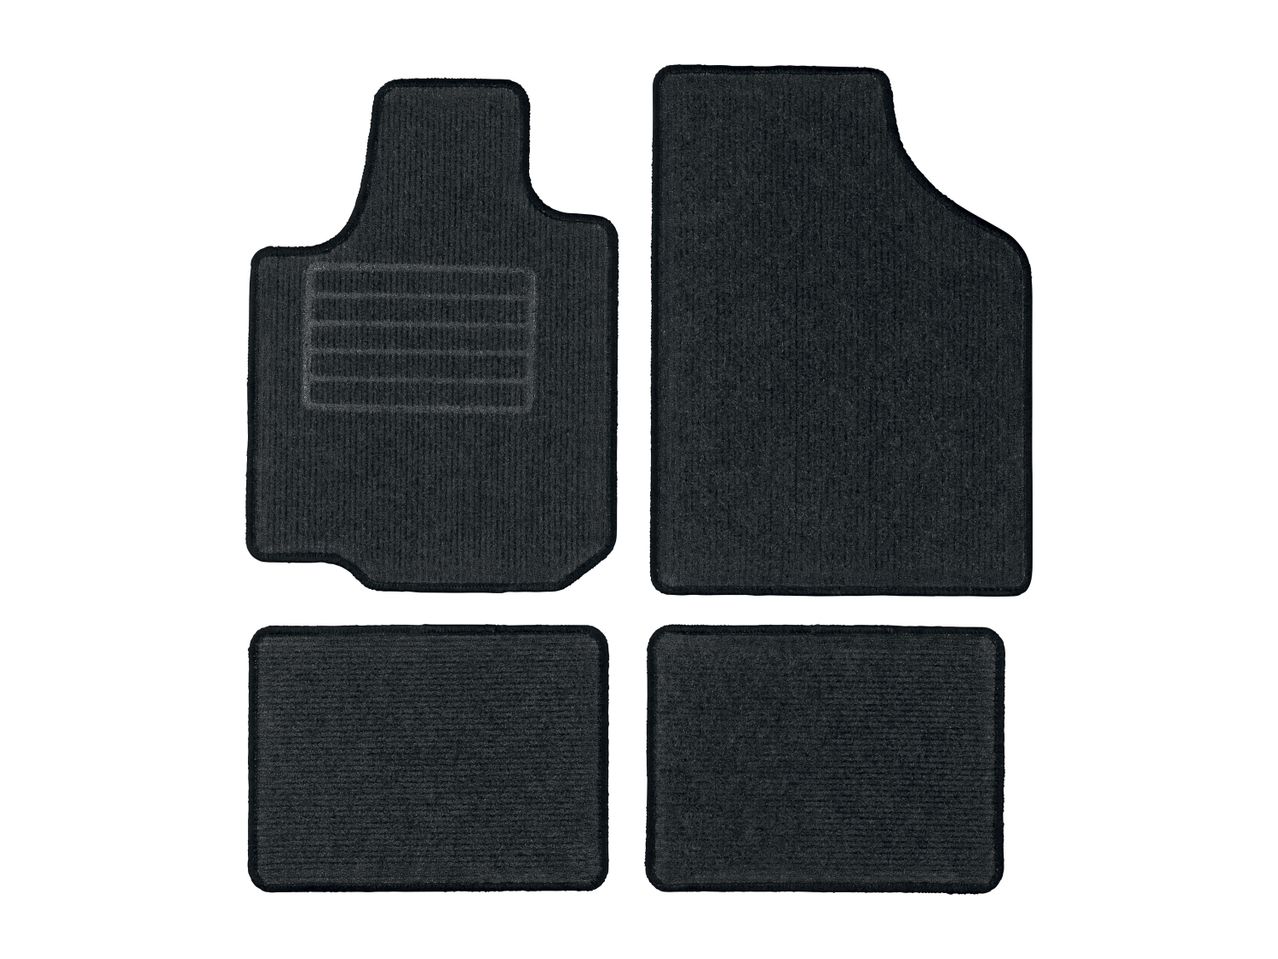 Go to full screen view: Ultimate Speed Car Mat Set - 4-piece set - Image 3